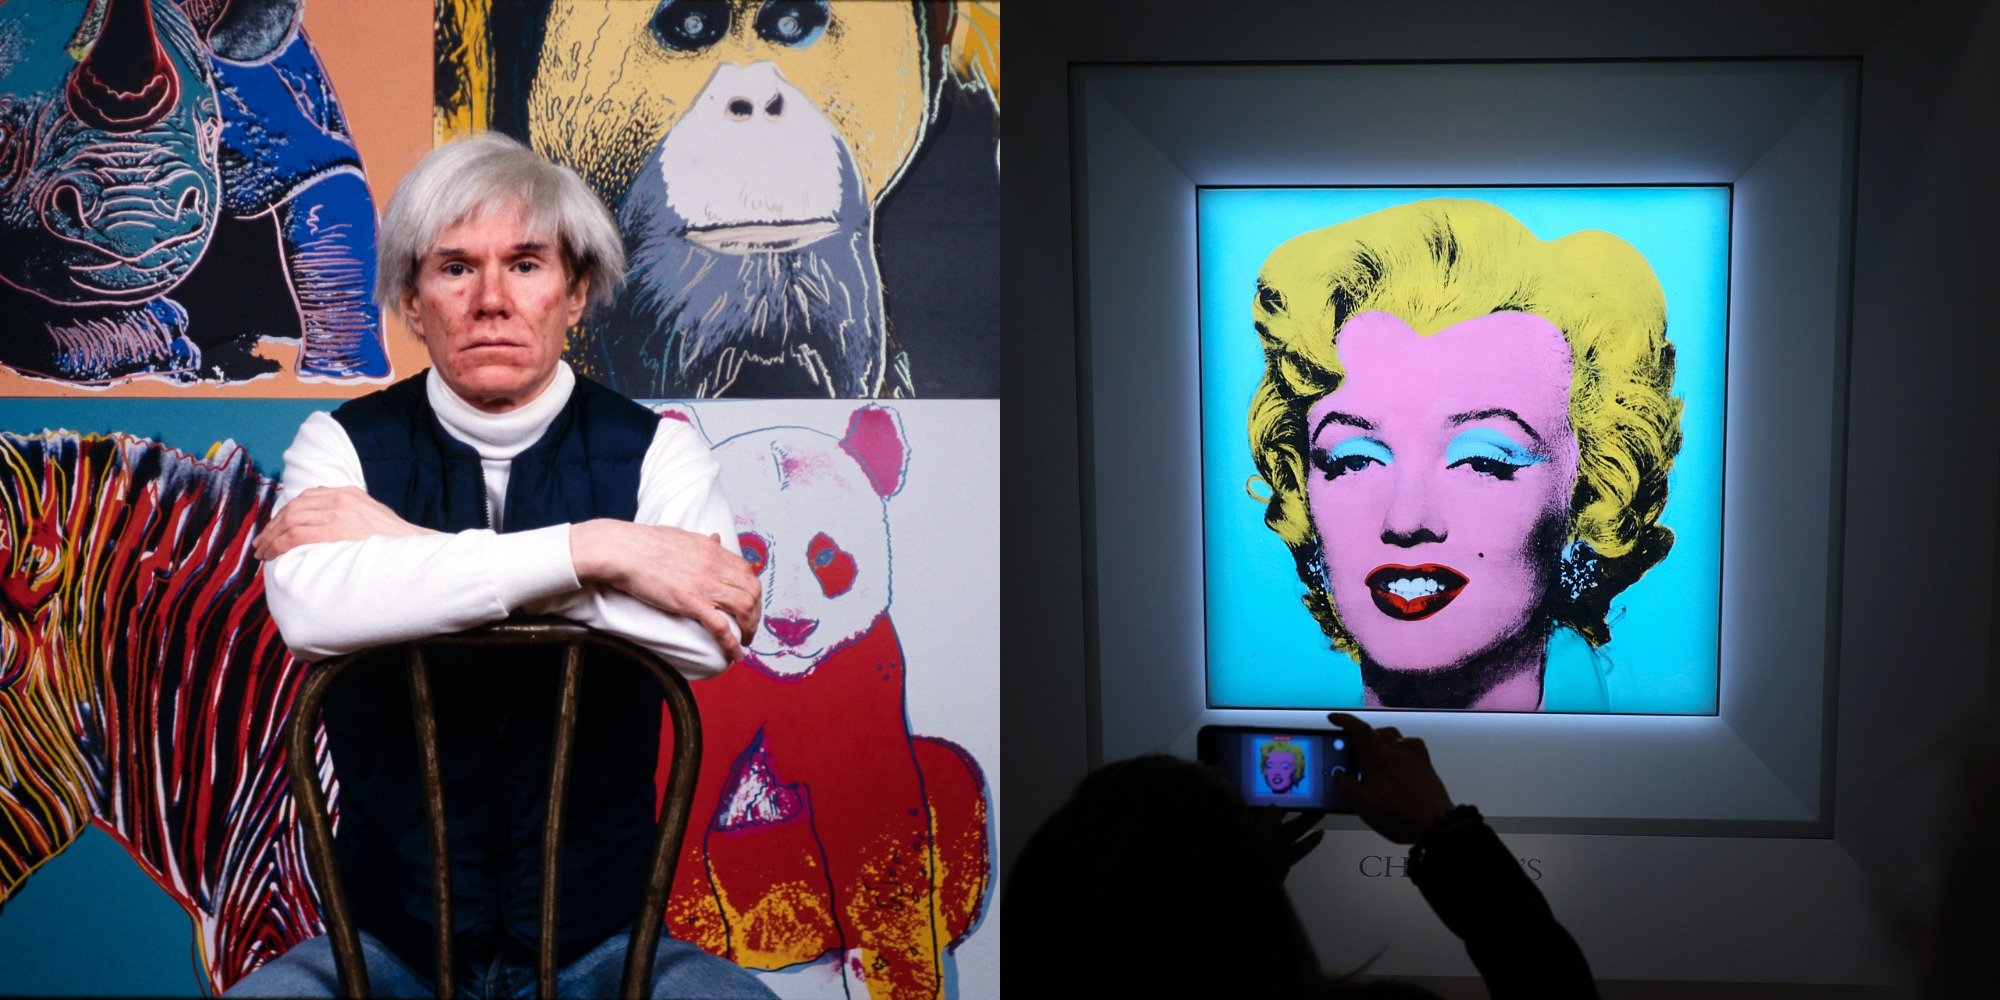 Side by side photographs of Andy Warhol and his Marilyn Monroe painting.